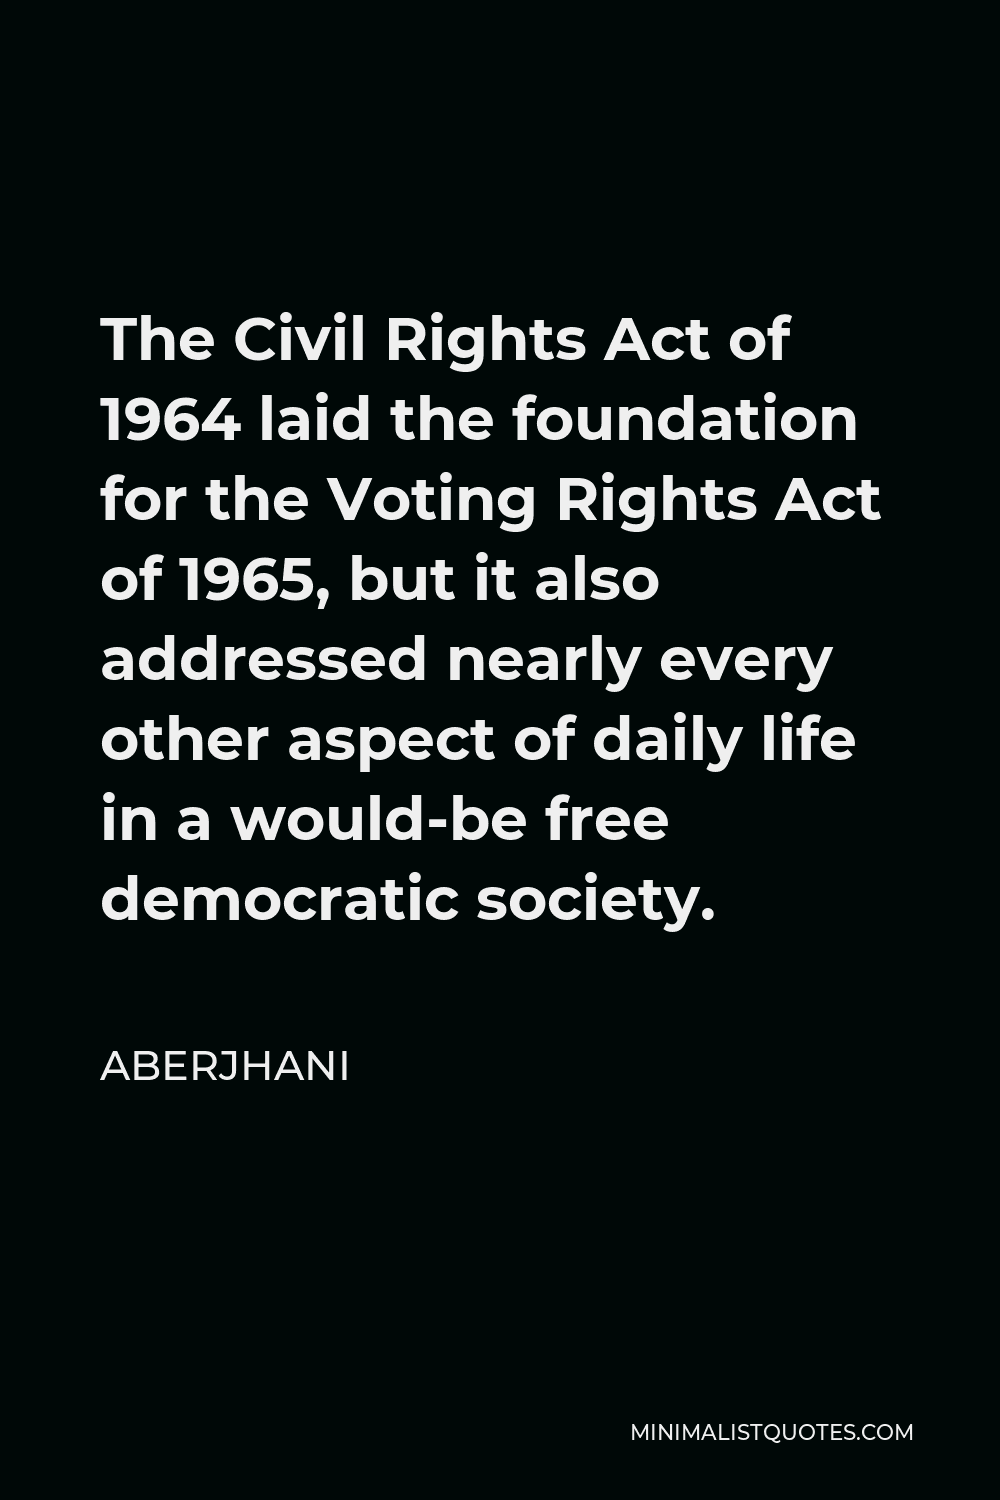 Aberjhani Quote - The Civil Rights Act of 1964 laid the foundation for the Voting Rights Act of 1965, but it also addressed nearly every other aspect of daily life in a would-be free democratic society.